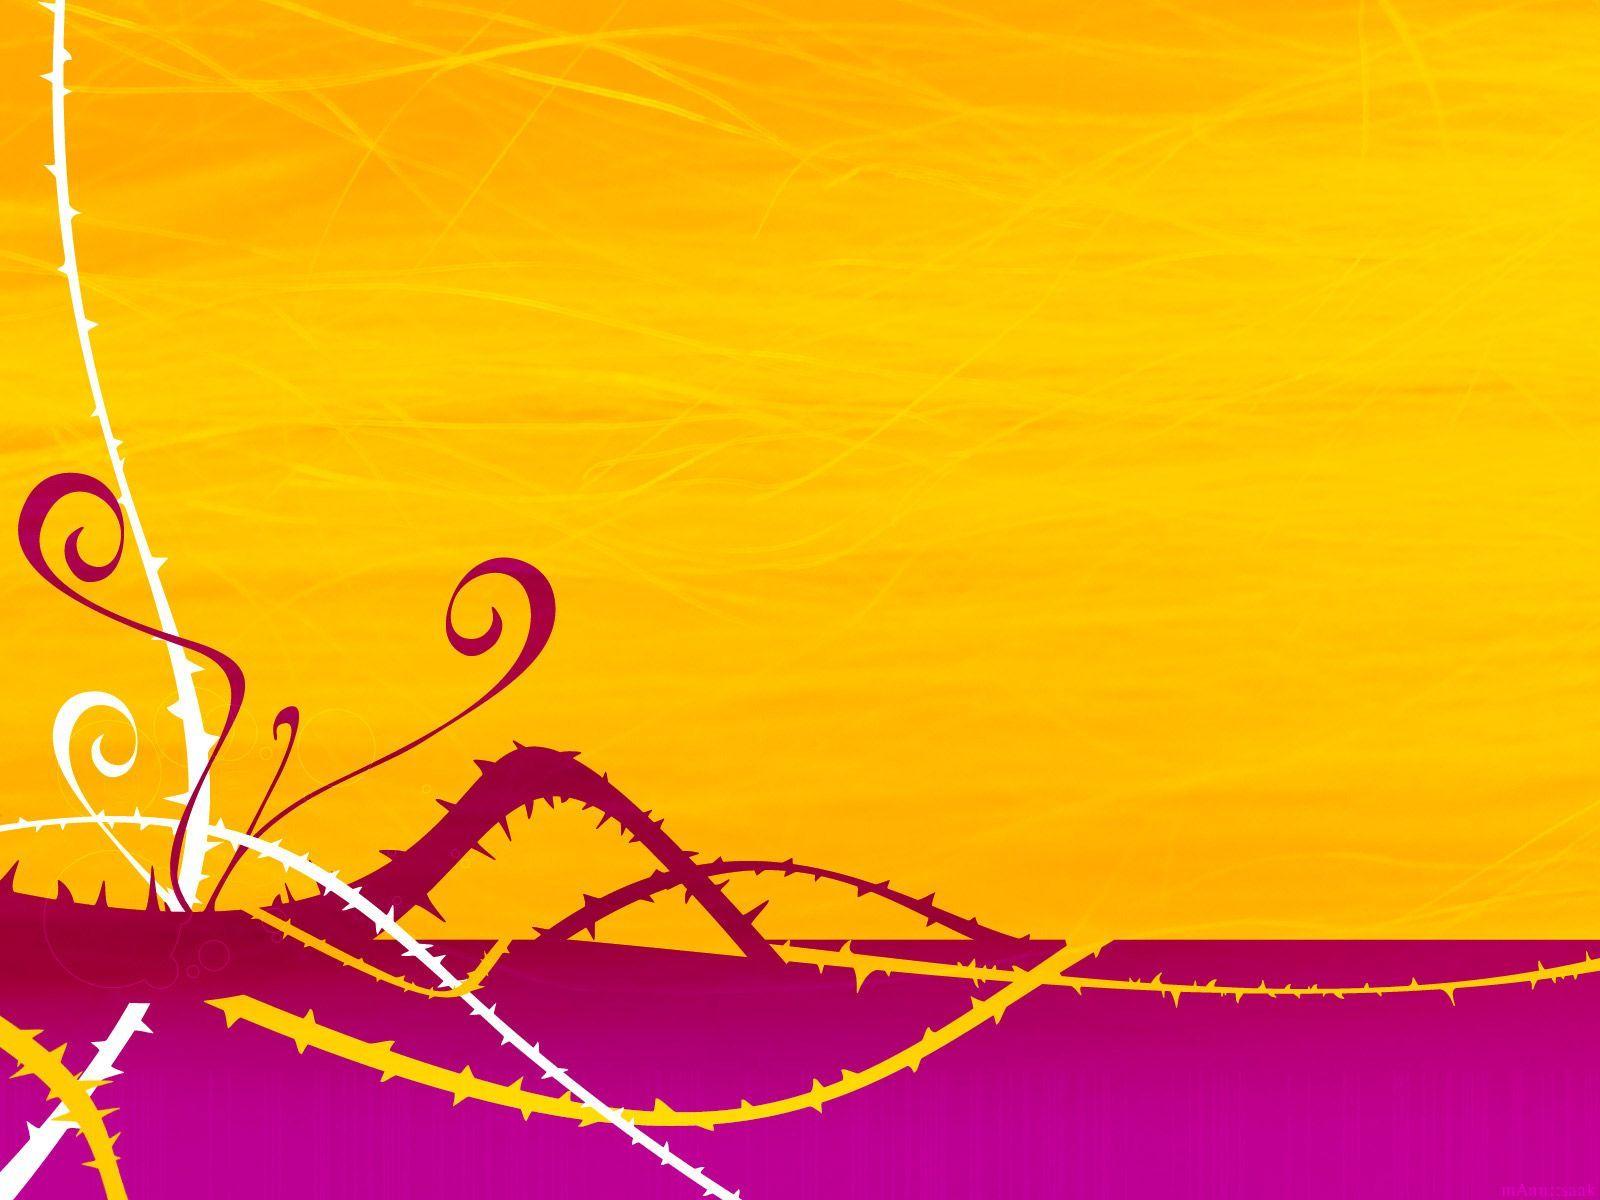 Free Orange And Purple Lines Dance Backgrounds For PowerPoint